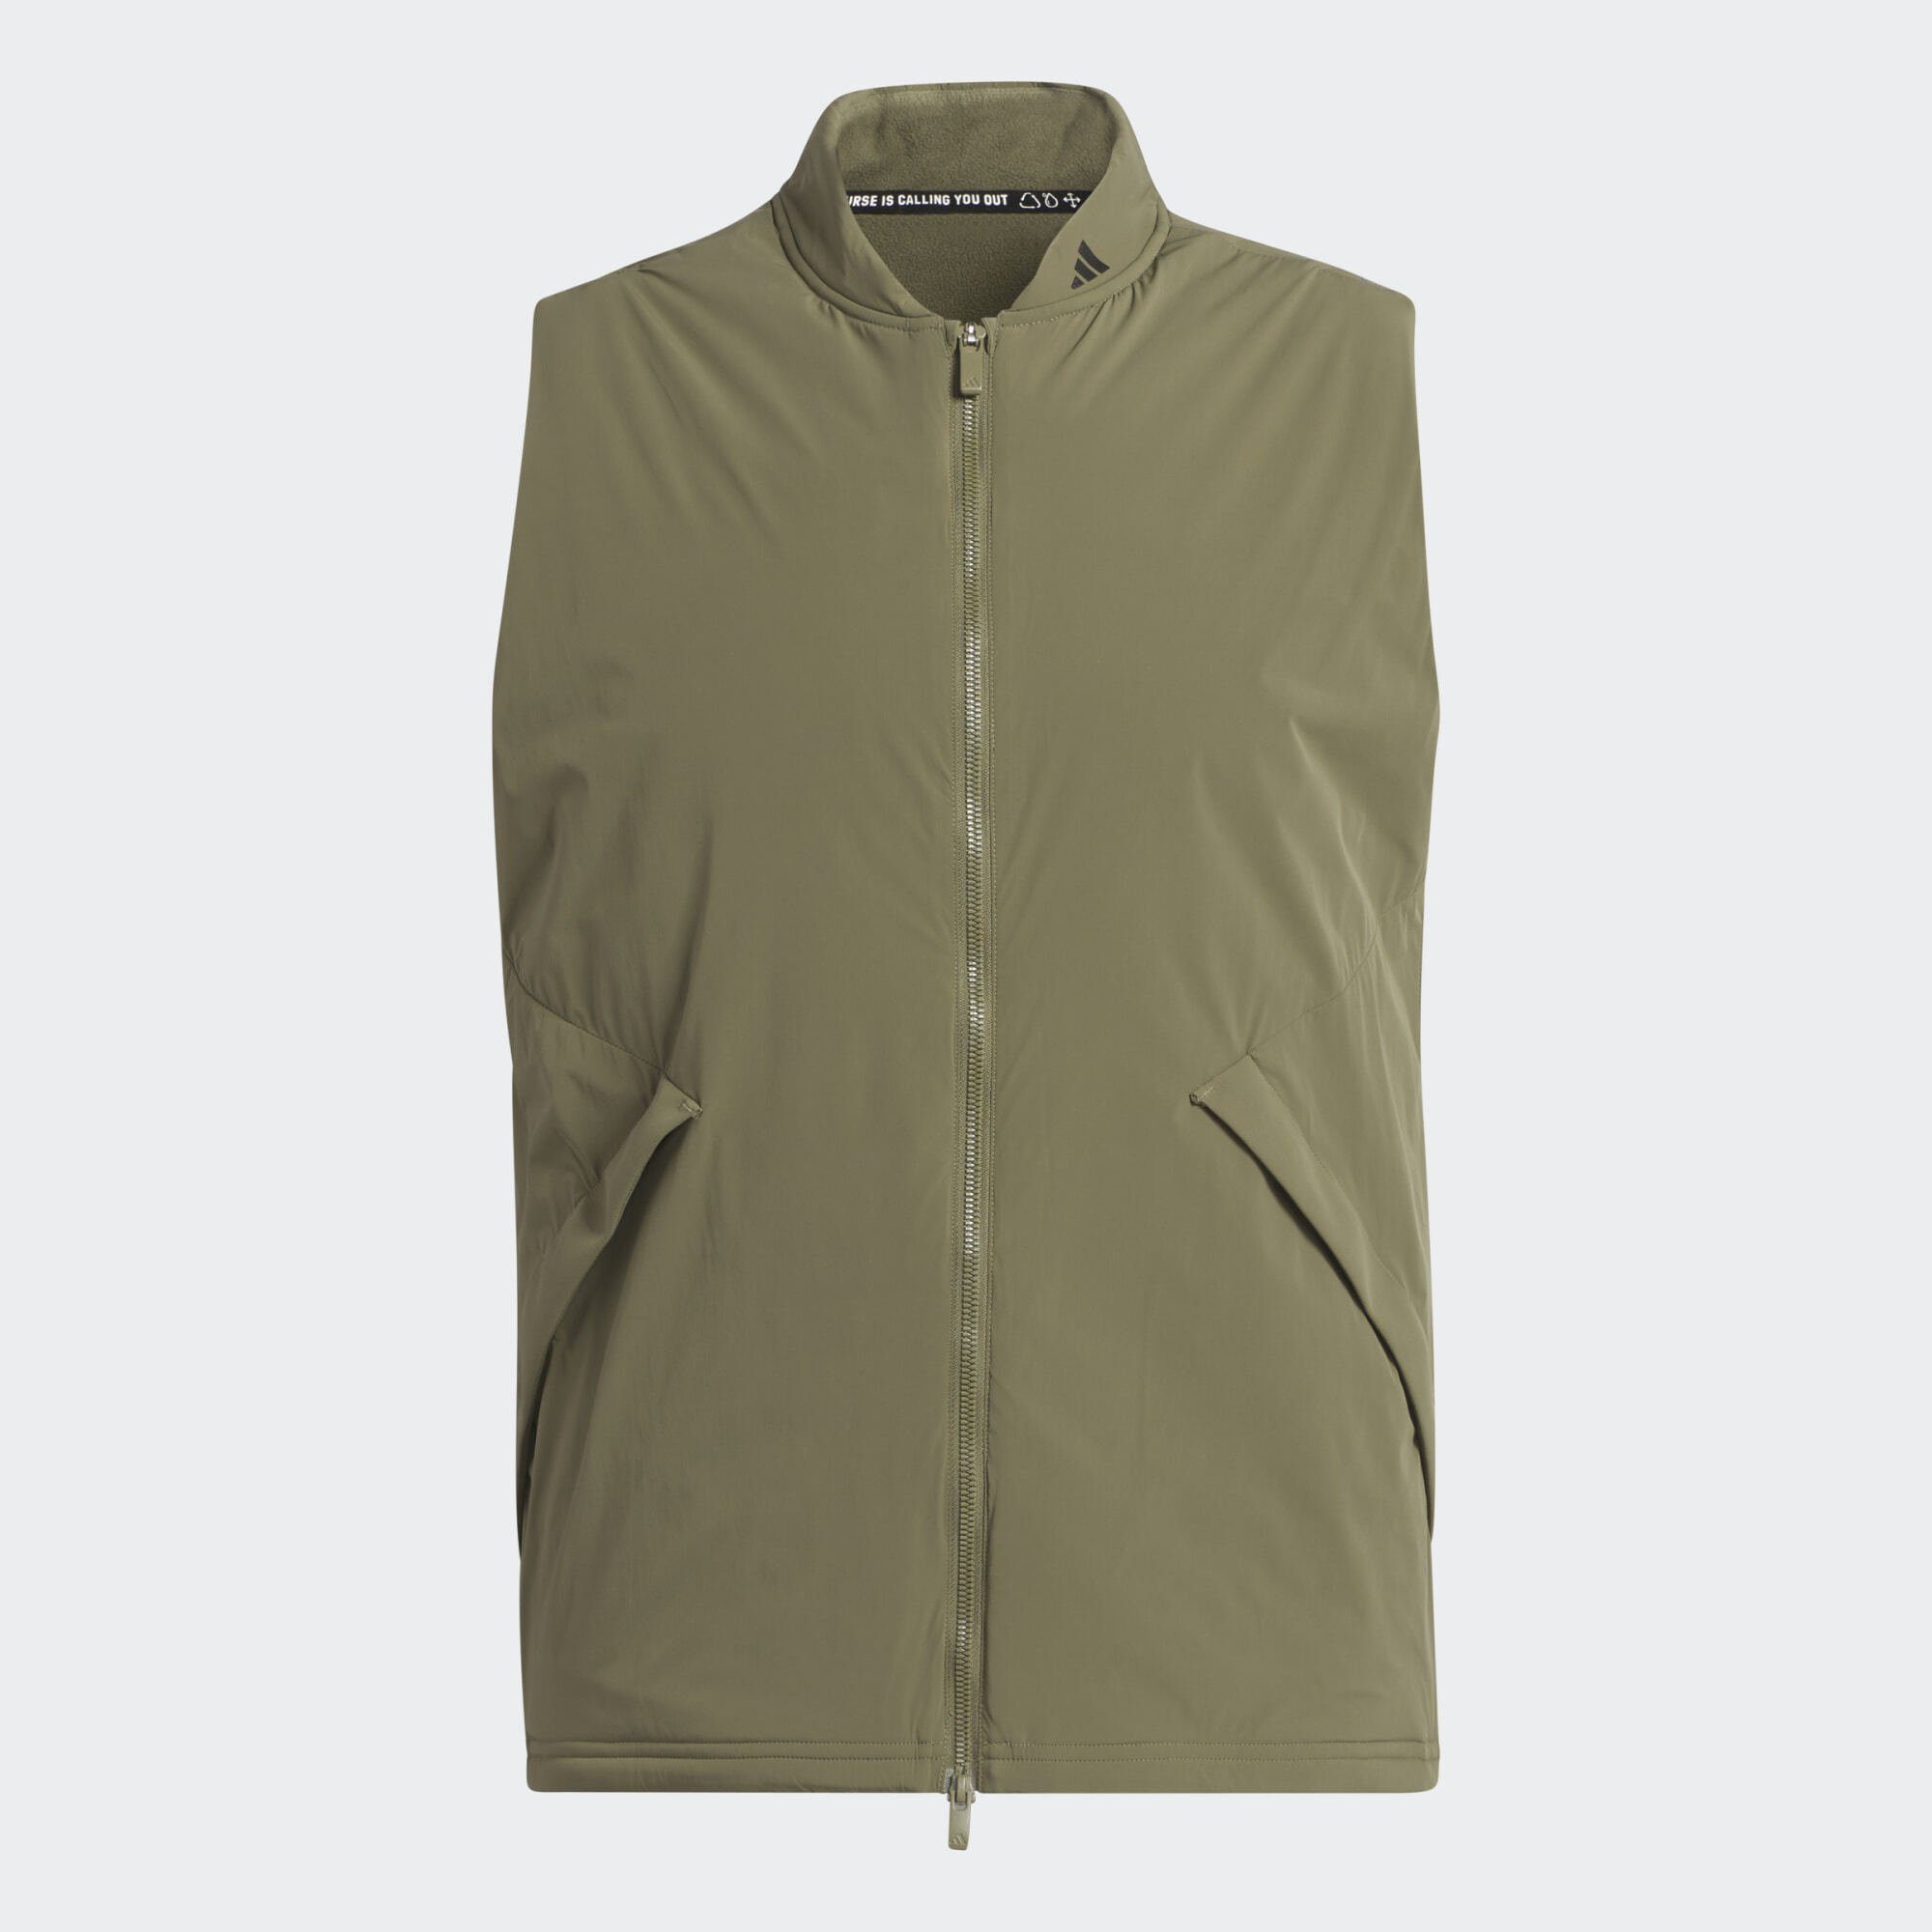 Olive PADDED Funktionsweste Performance adidas FULL-ZIP ULTIMATE365 FROSTGUARD TOUR WESTE Strata